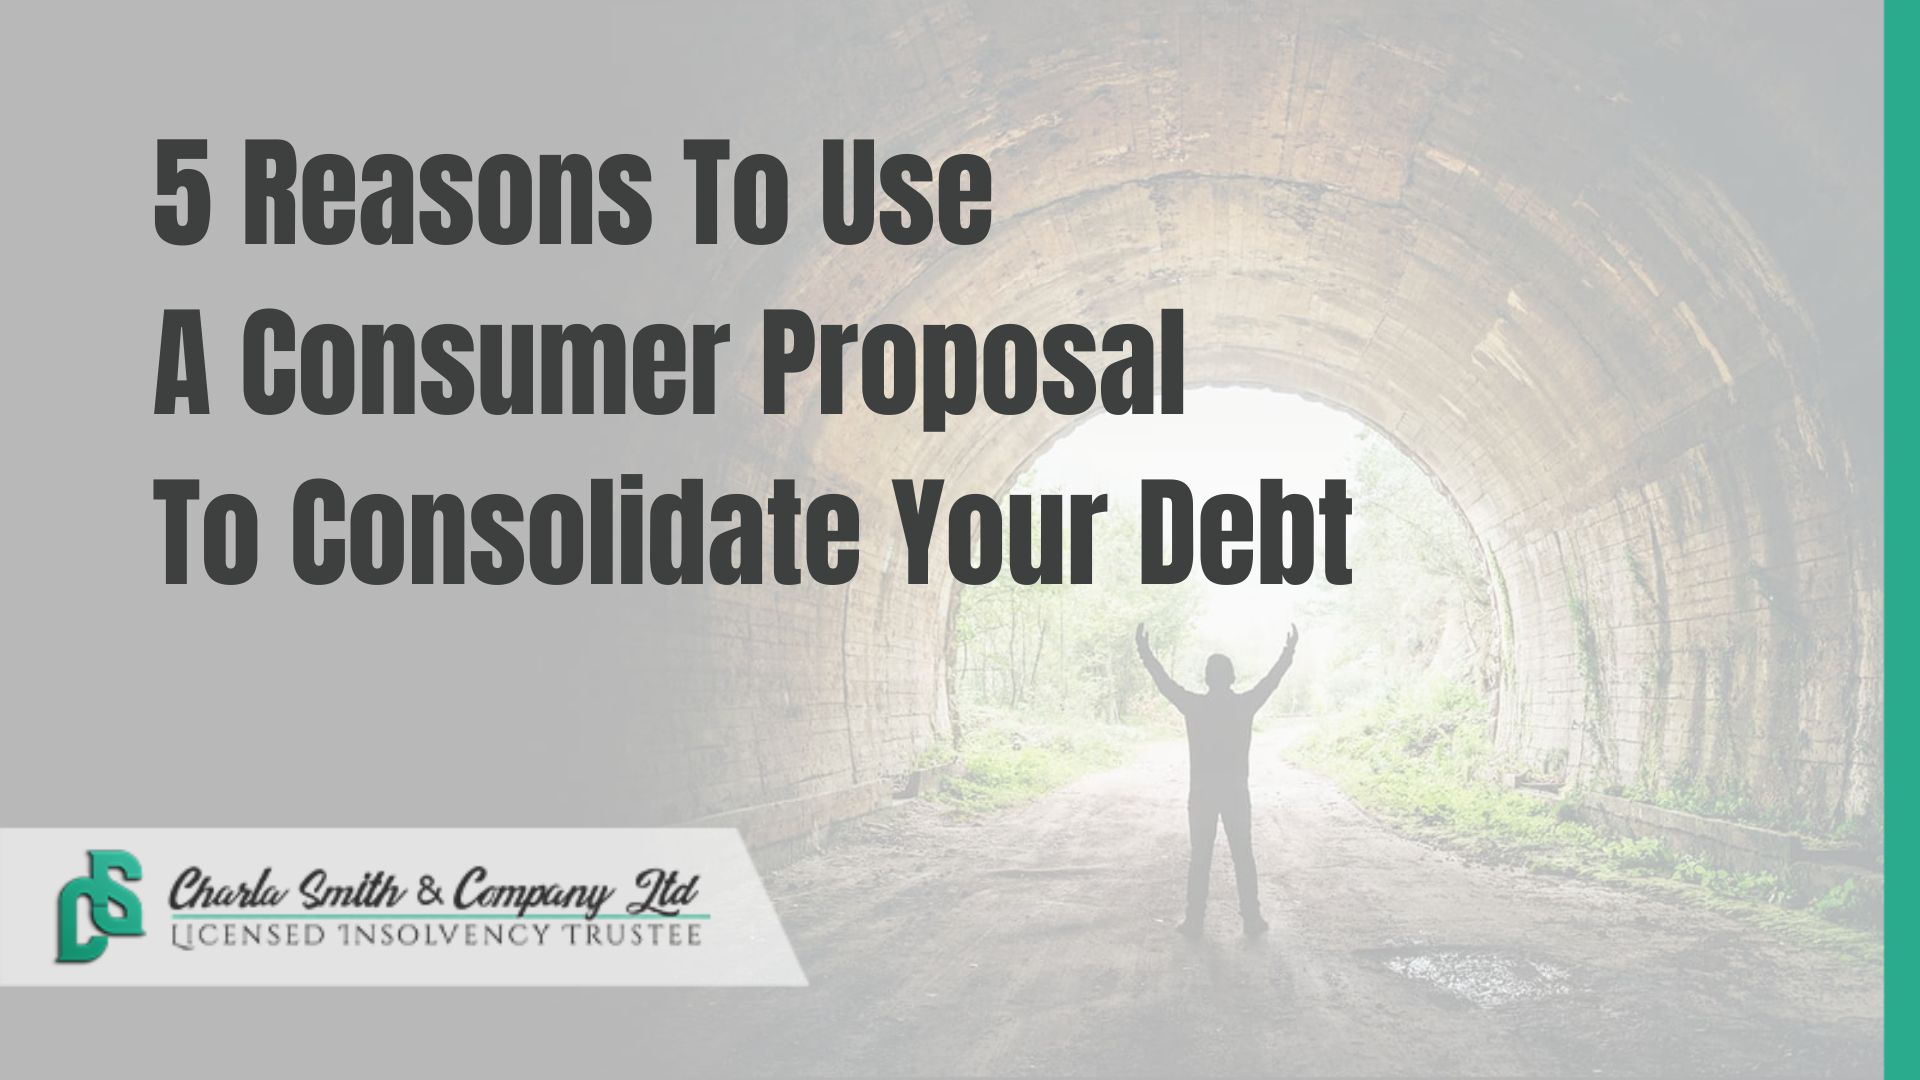 5 Reasons To Use A Consumer Proposal To Consolidate Your Debt